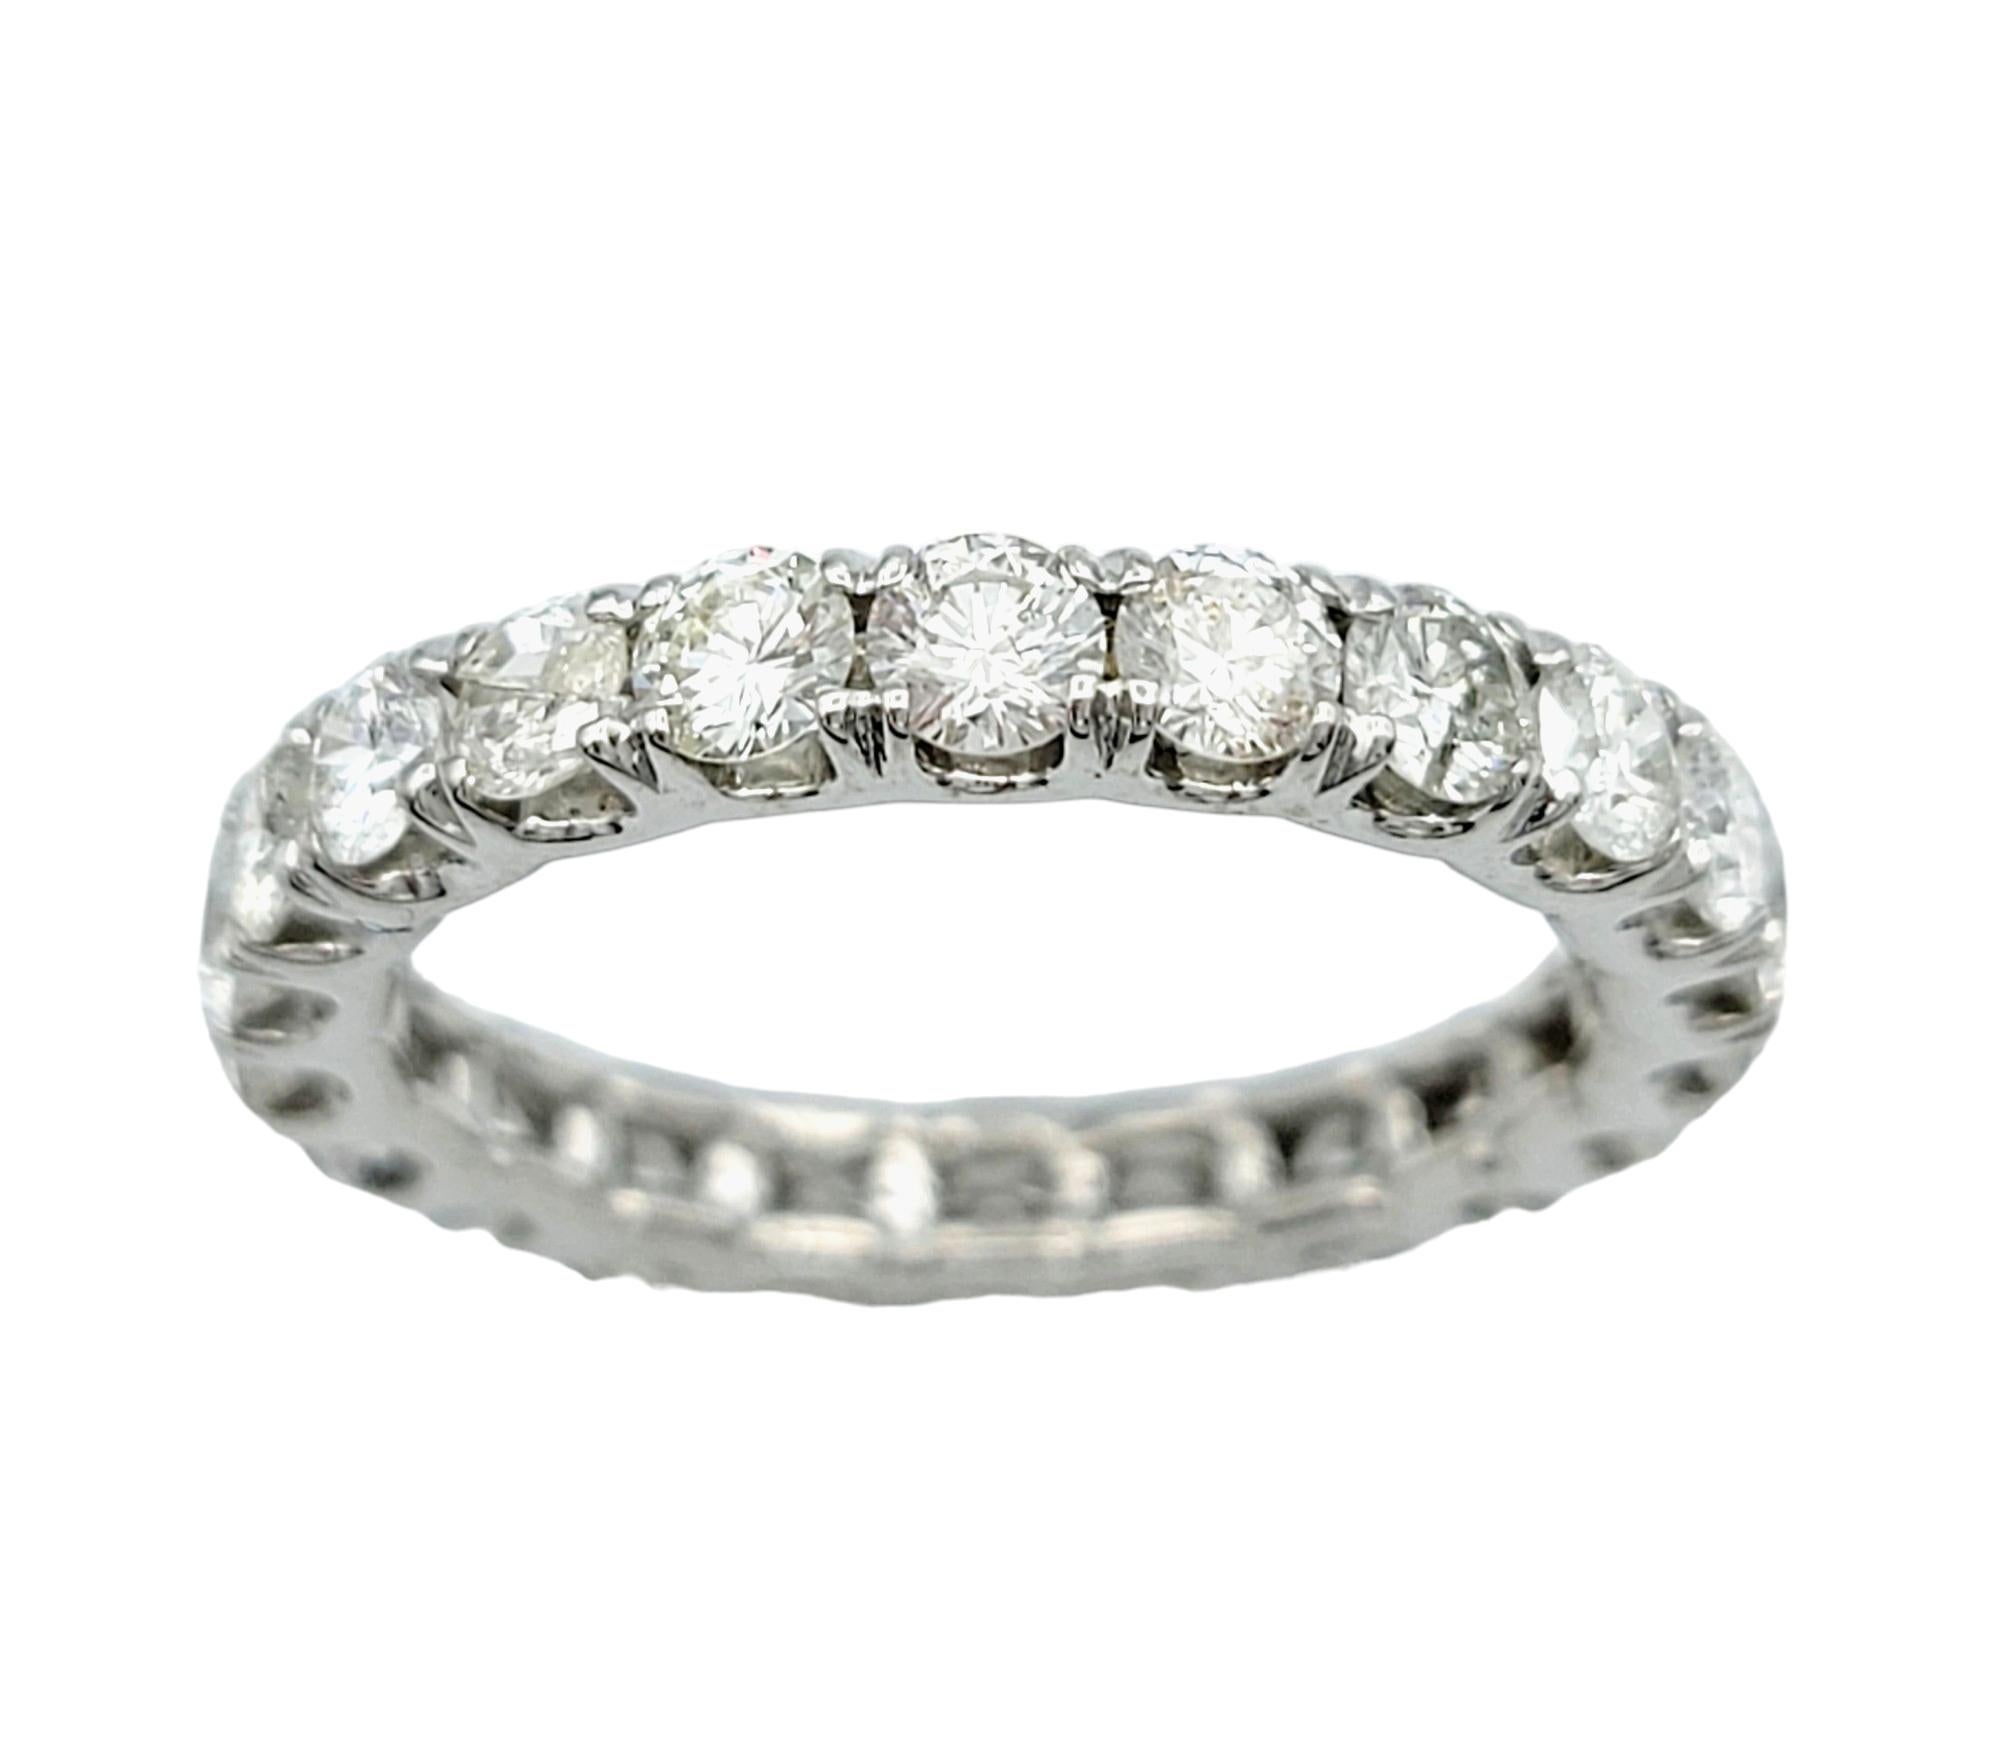 Ring Size: 6.75

This absolutely gorgeous band ring, set in exquisite 18 karat white gold, features a classic and versatile design. The coveted eternity style showcases a continuous row of shimmering round diamonds, creating a timeless and elegant